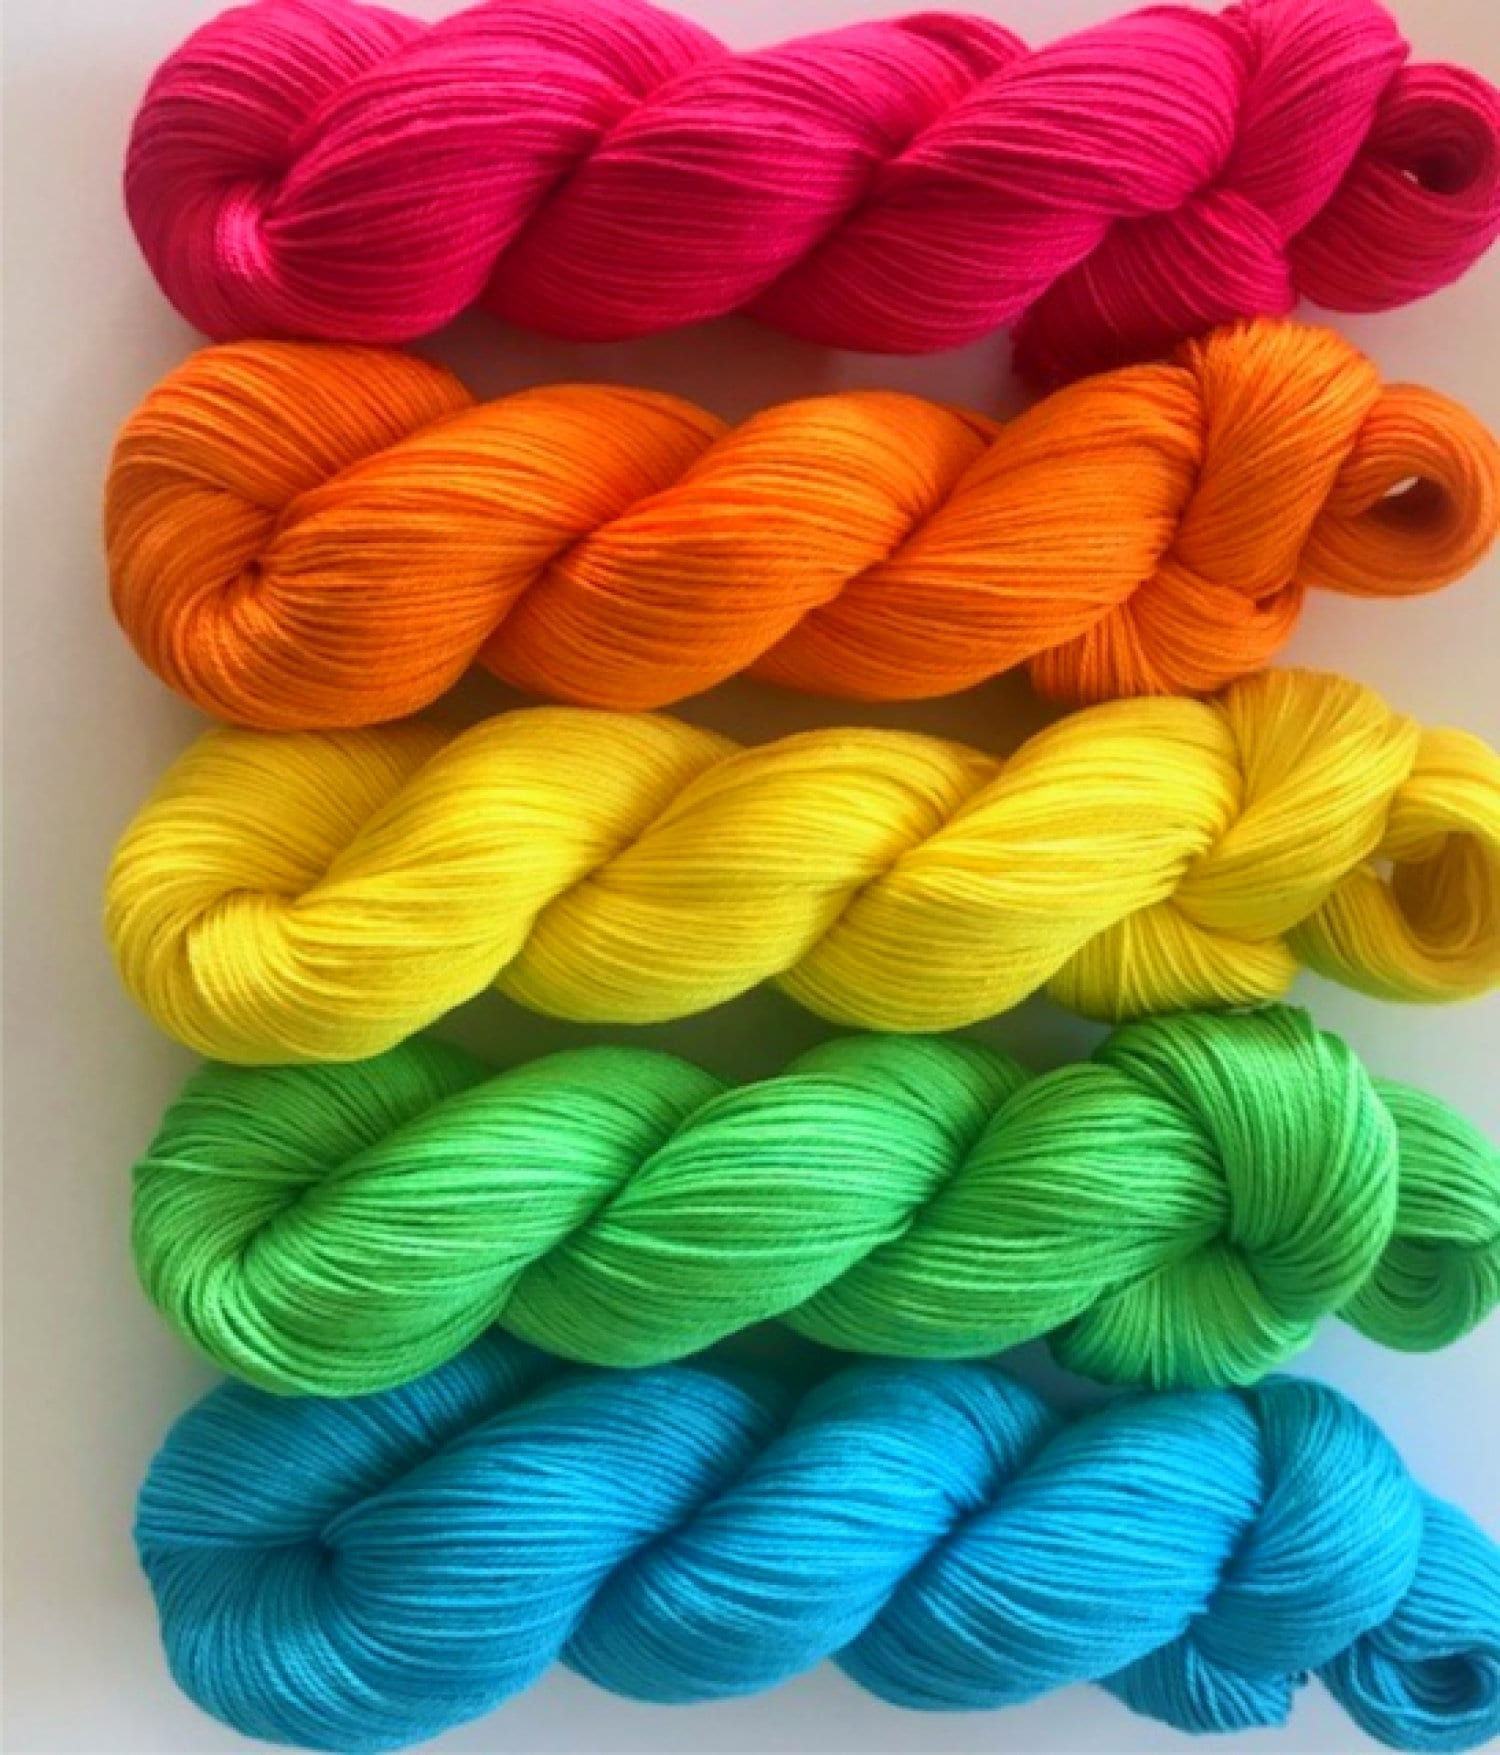 Vegan Yarn Kit - Hand Dyed Fingering /Sock Weight - Bamboo Cotton - Neon Rainbow - 3 Ply - Five 320-yd Skeins - Semi Solid Indie Dyed Fiber